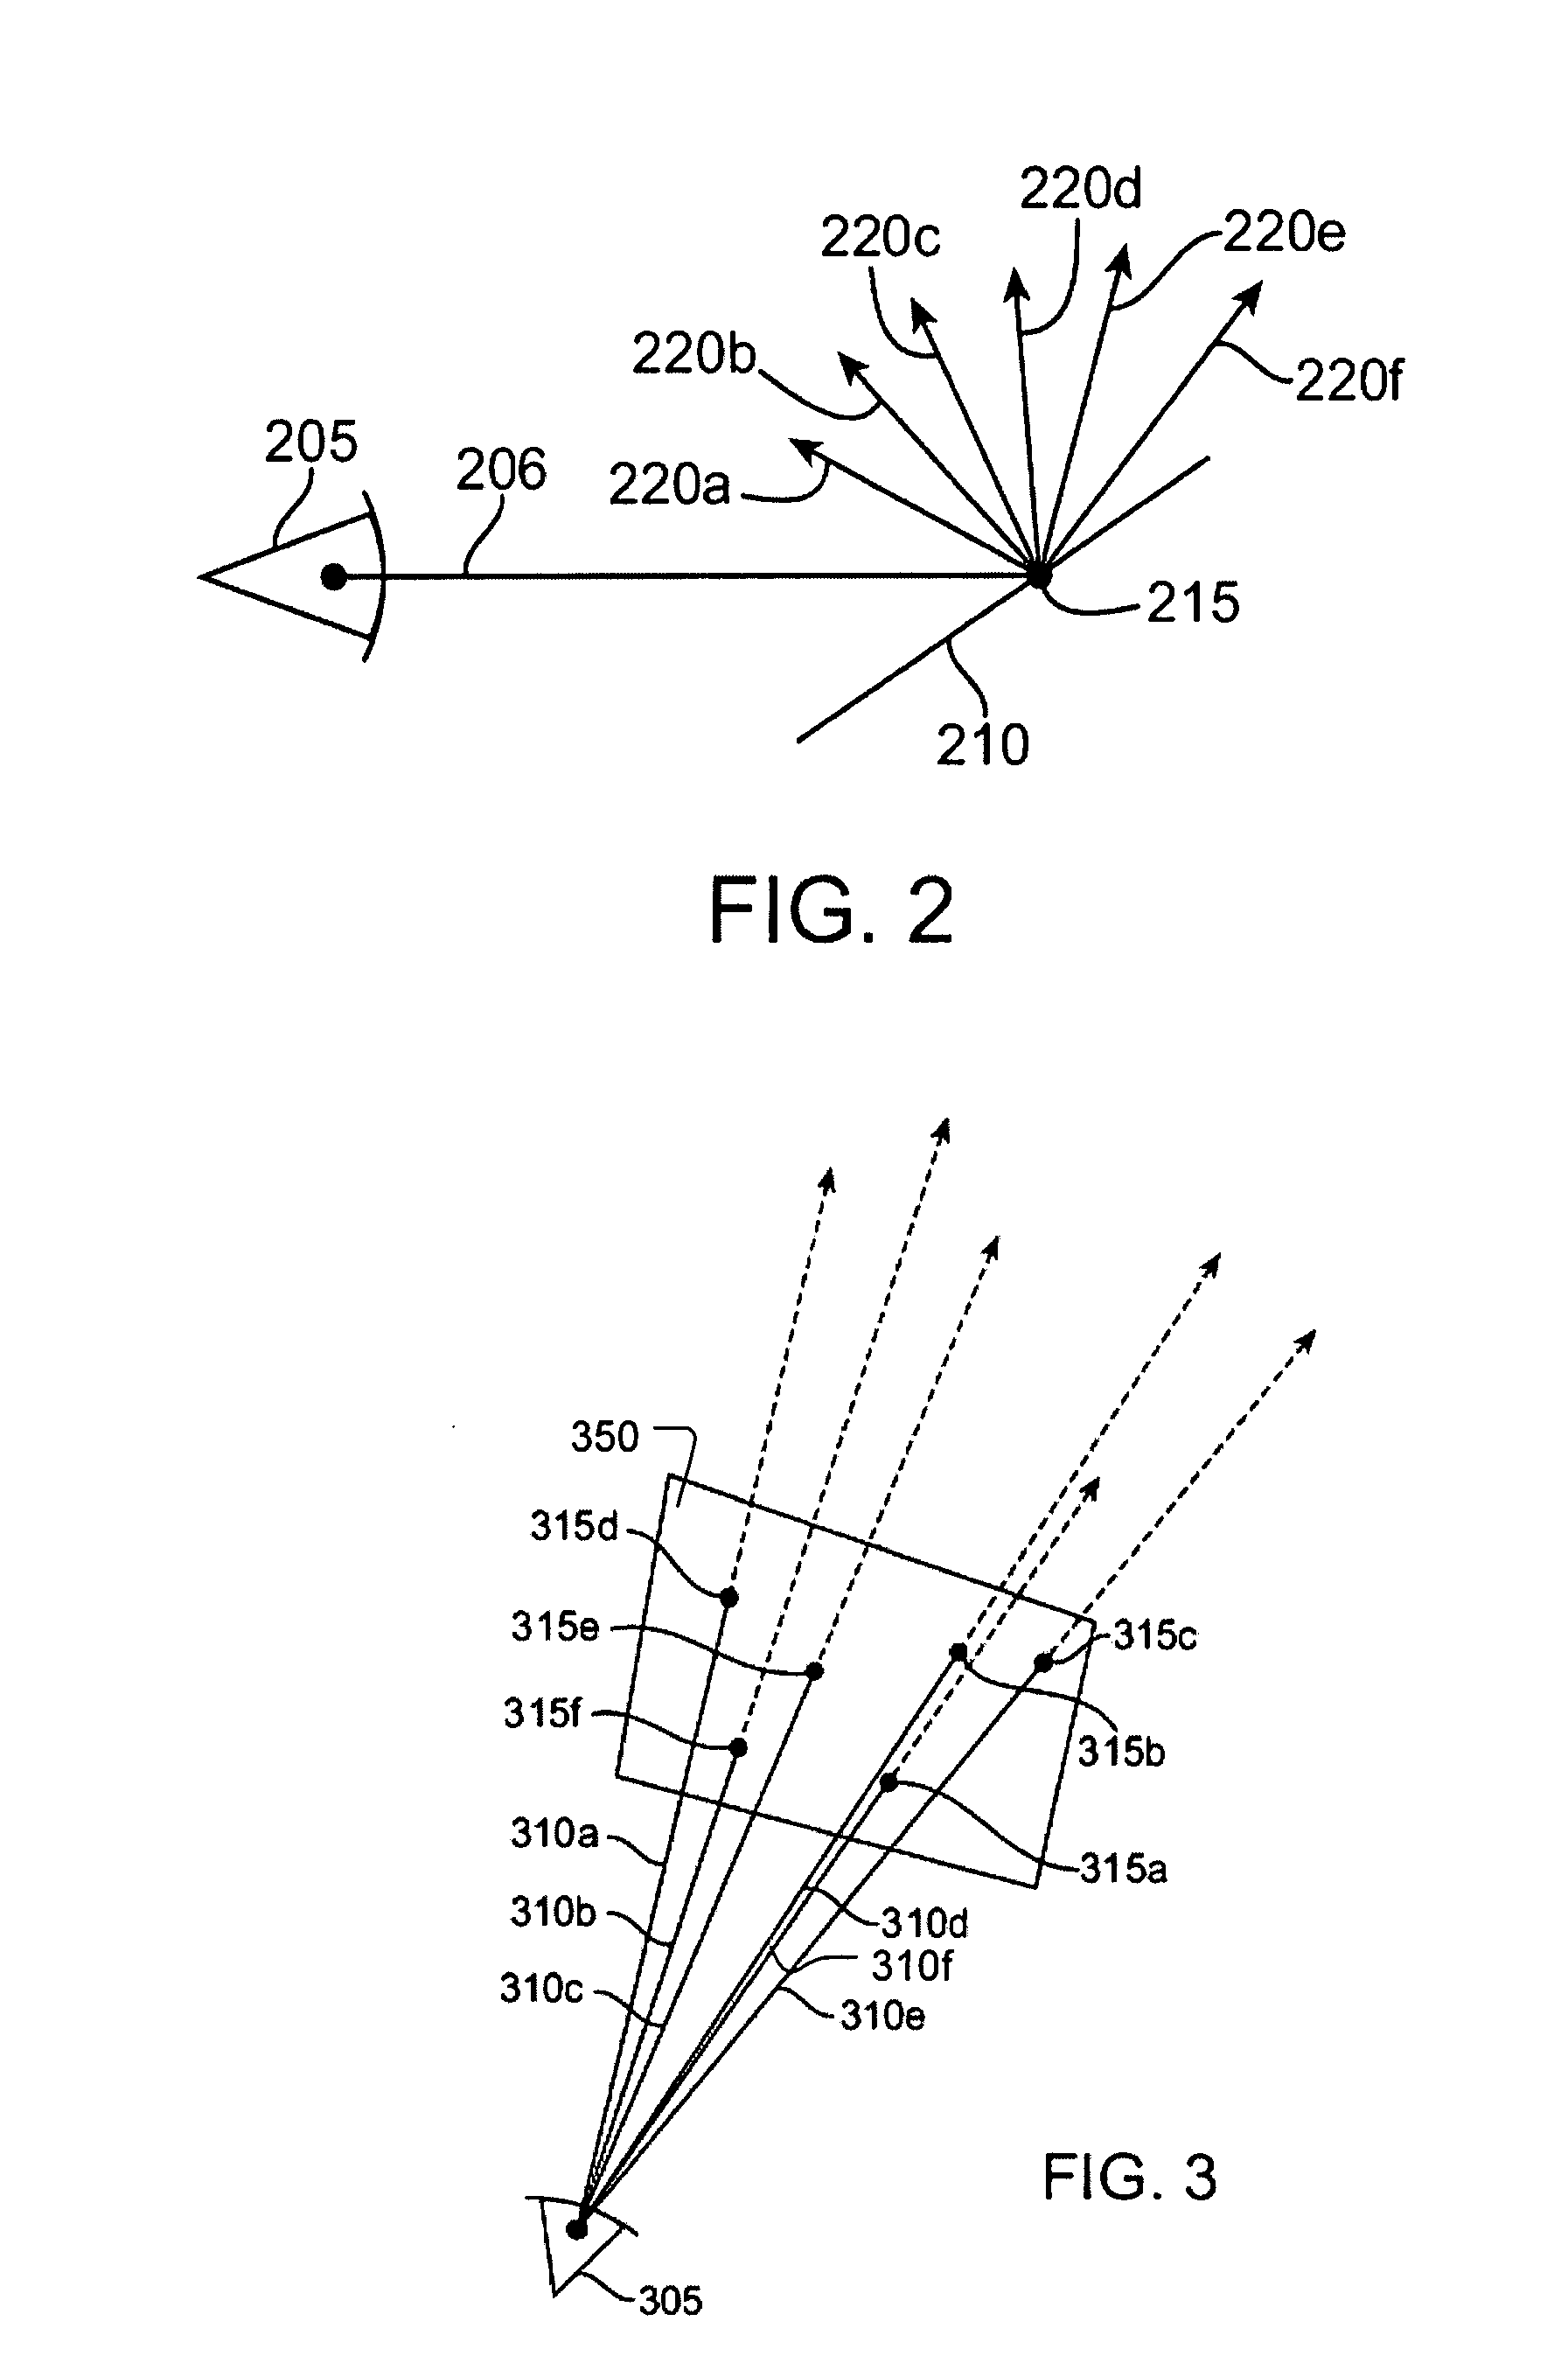 Method and apparatus for increasing efficiency of transmission and/or storage of rays for parallelized ray intersection testing